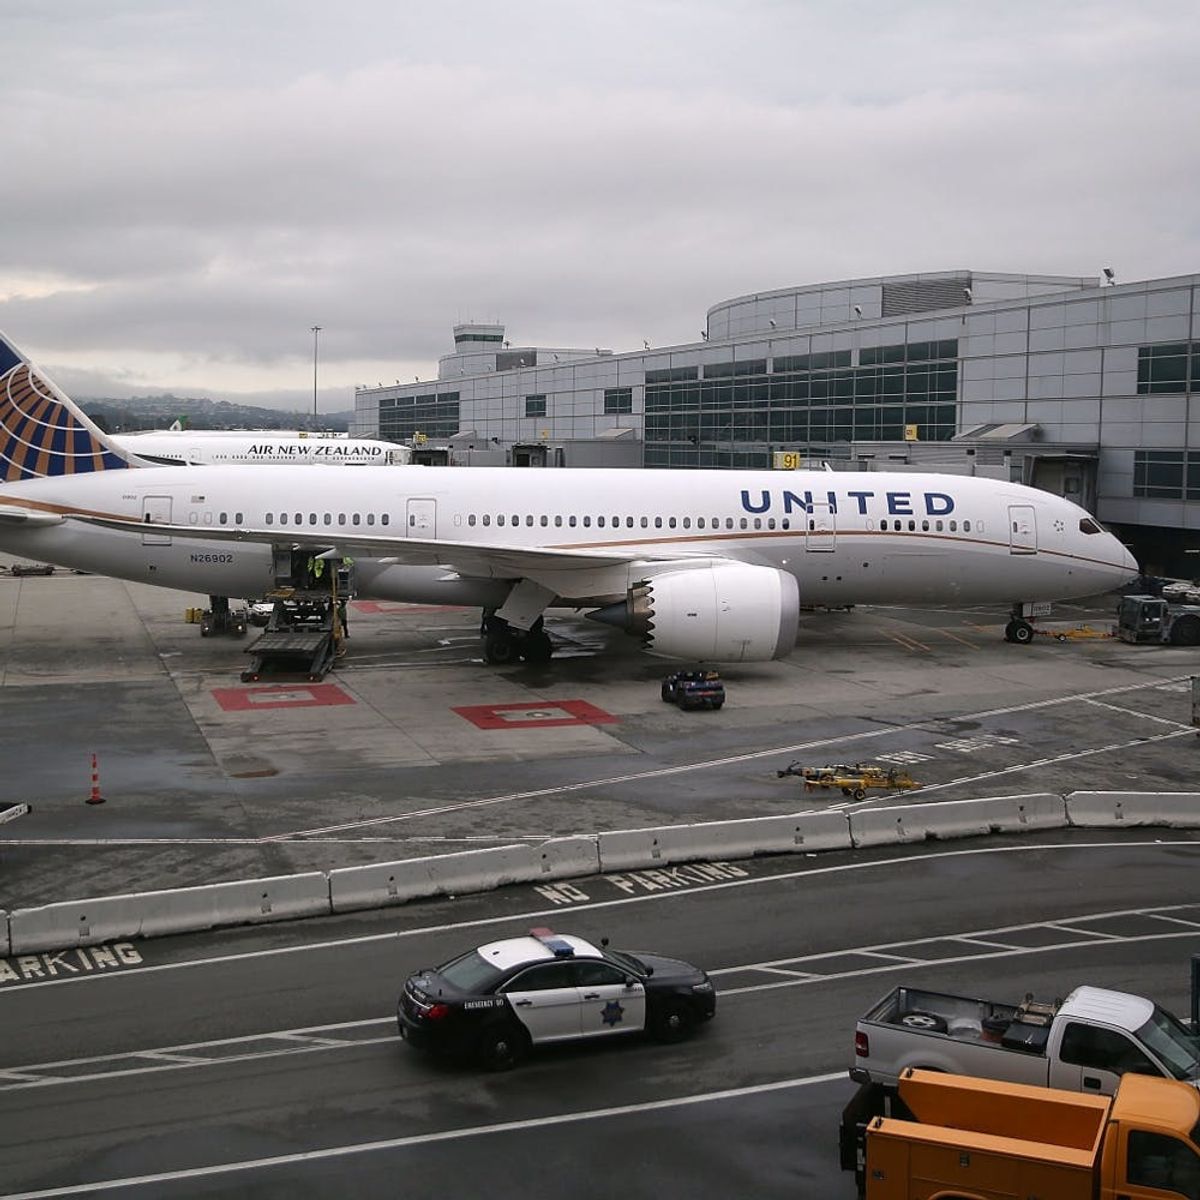 United Airline Nightmares Continue As a Man Is Stung by a Scorpion in the Middle of a Flight